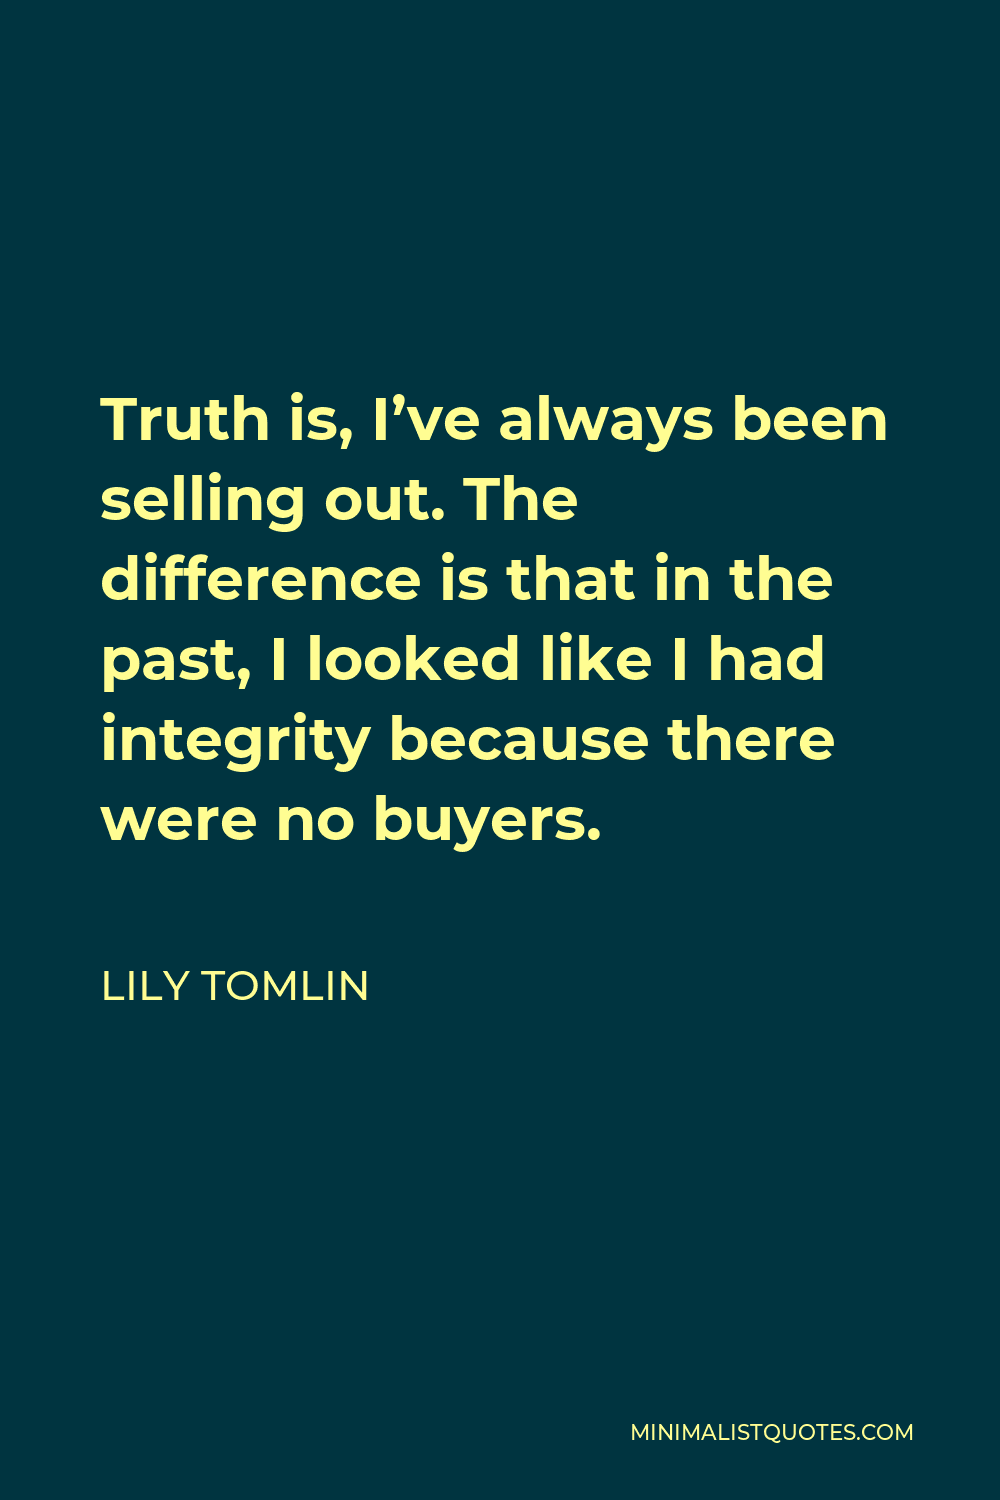 Lily Tomlin Quote - Truth is, I’ve always been selling out. The difference is that in the past, I looked like I had integrity because there were no buyers.